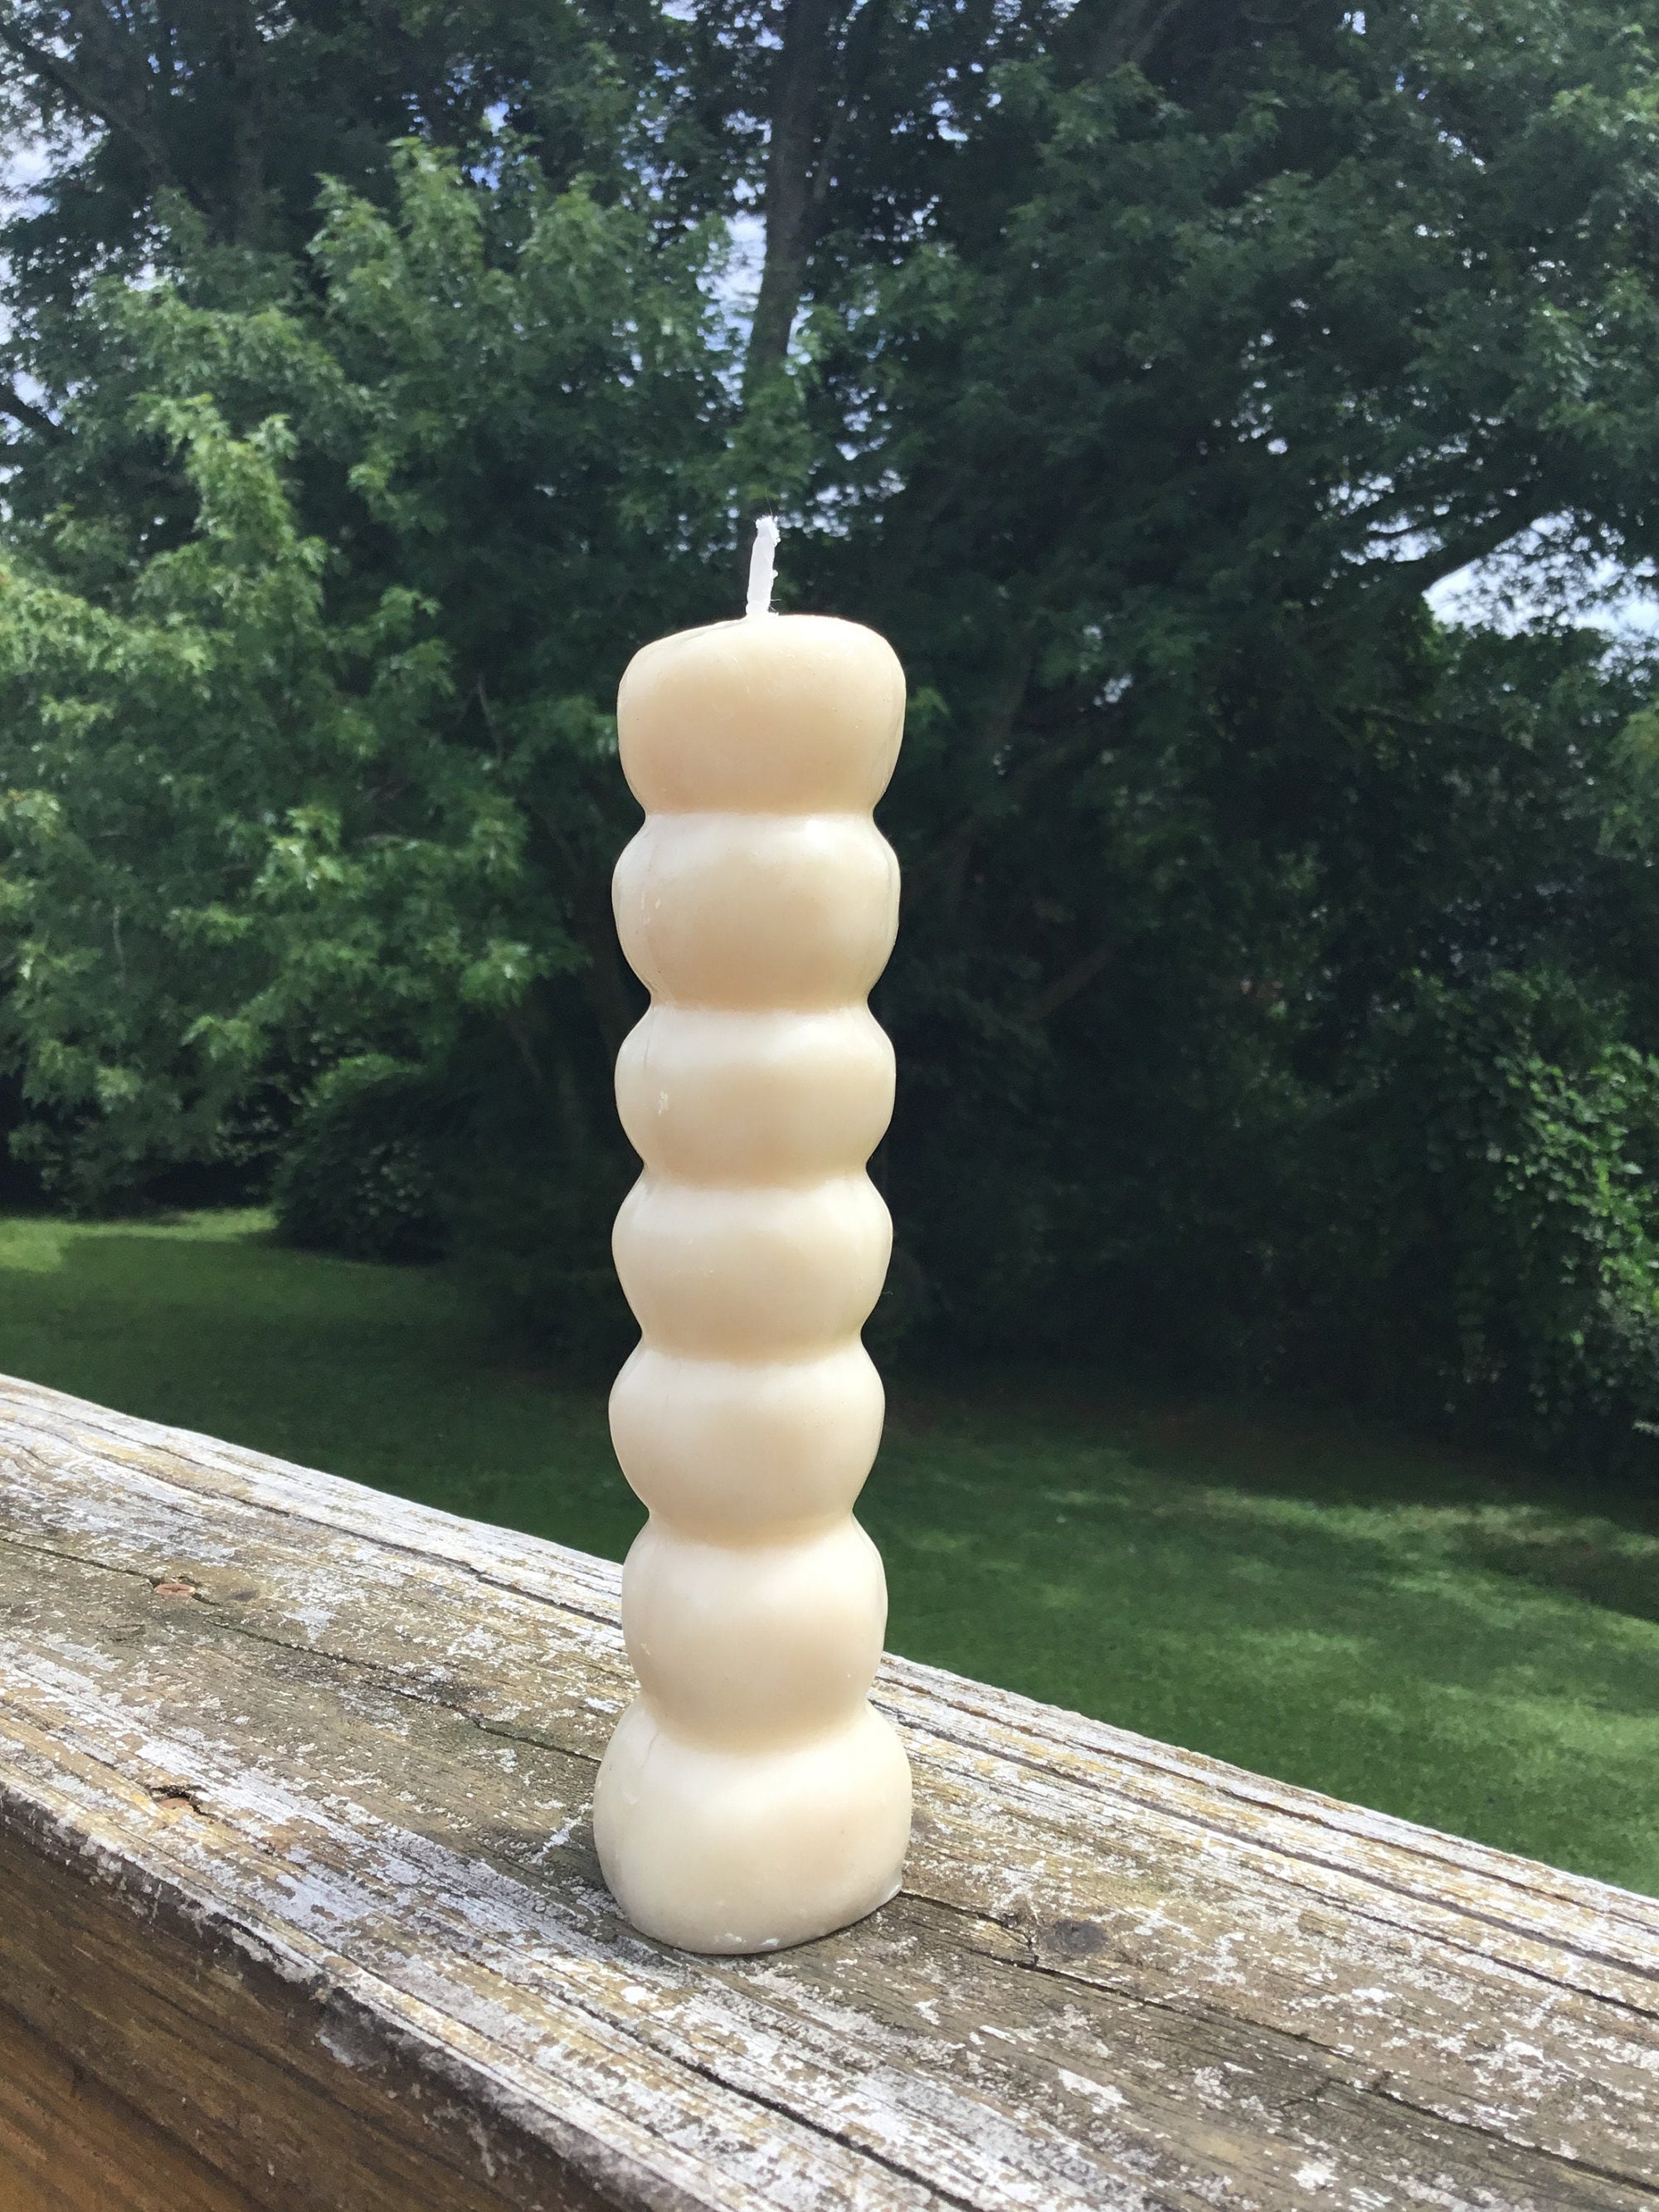 7 Knob Candles, Wishing Candles, Purification, Cleansing, Banishing, White, Ritual Candles